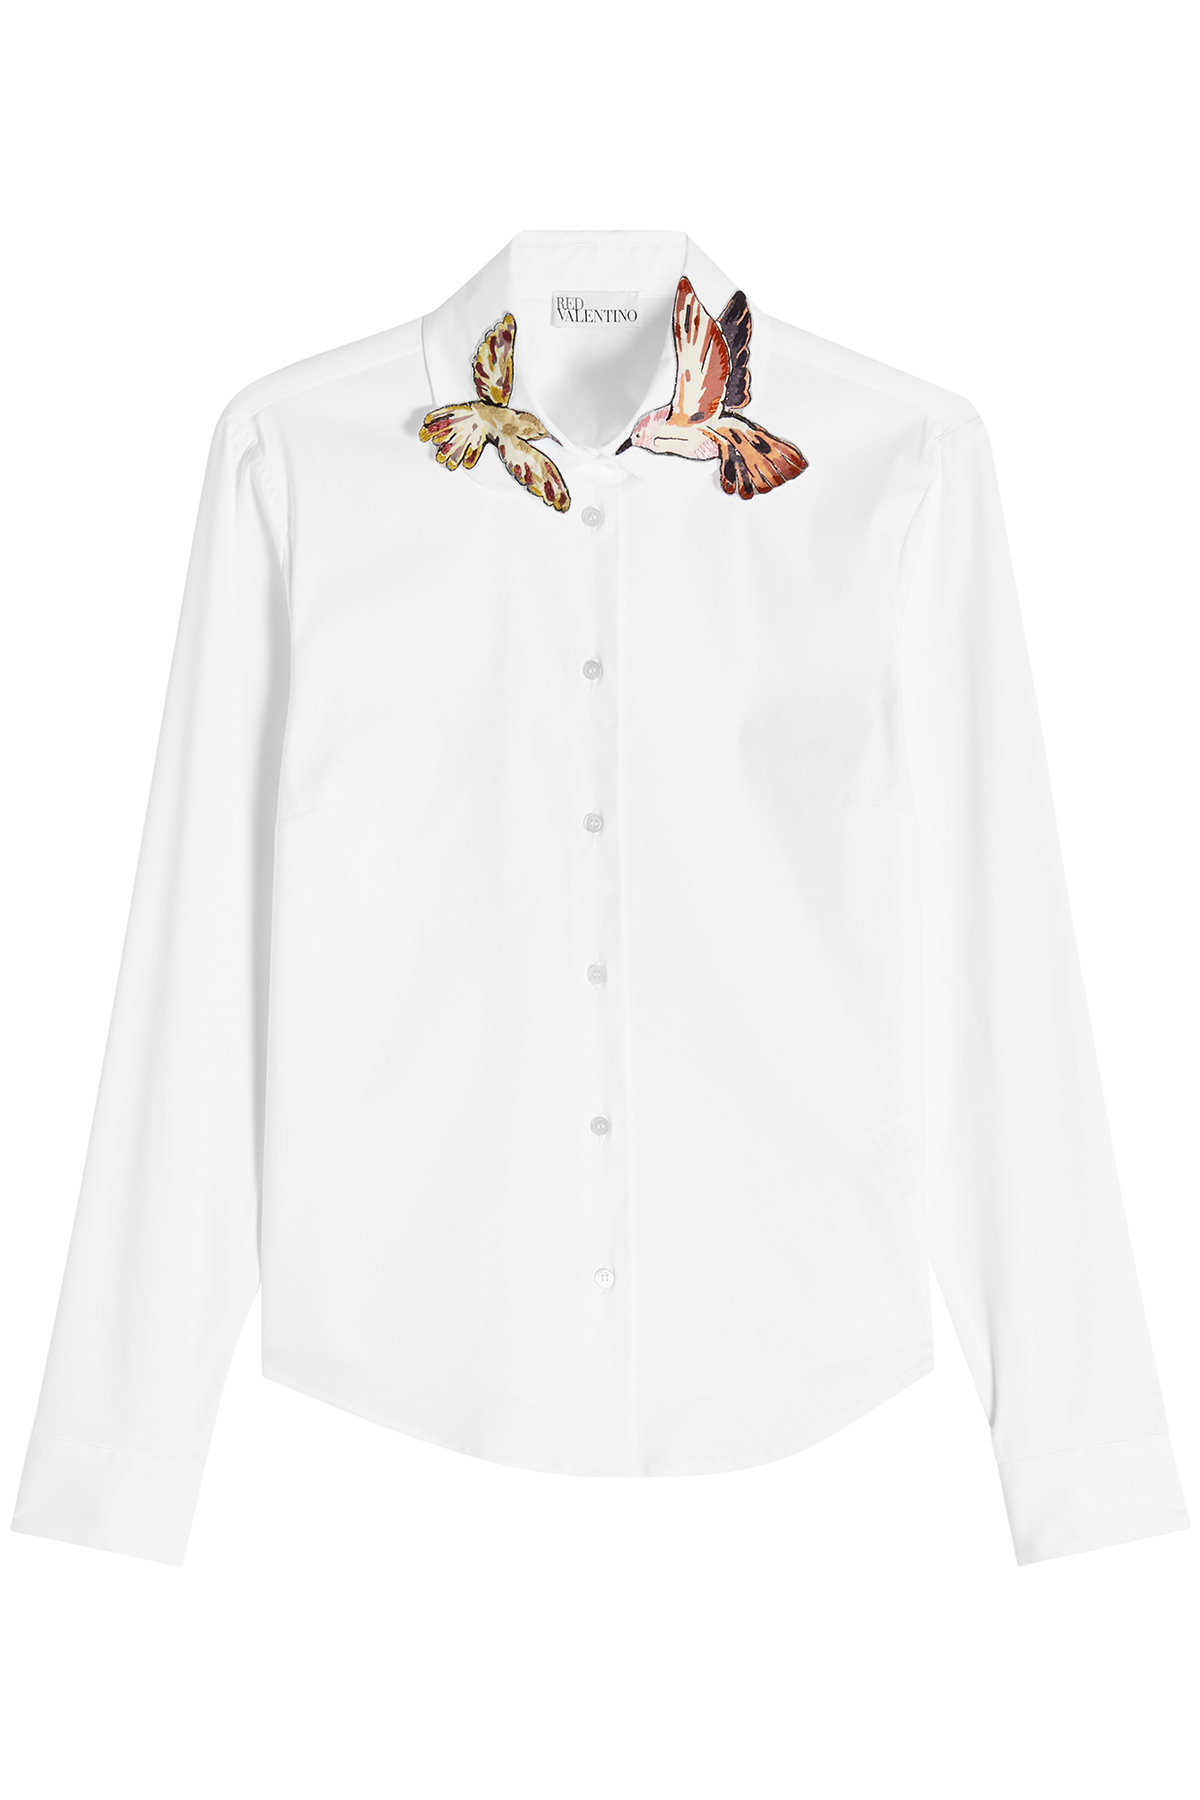 Cotton-Blend Shirt with Appliqué Collar by Red Valentino